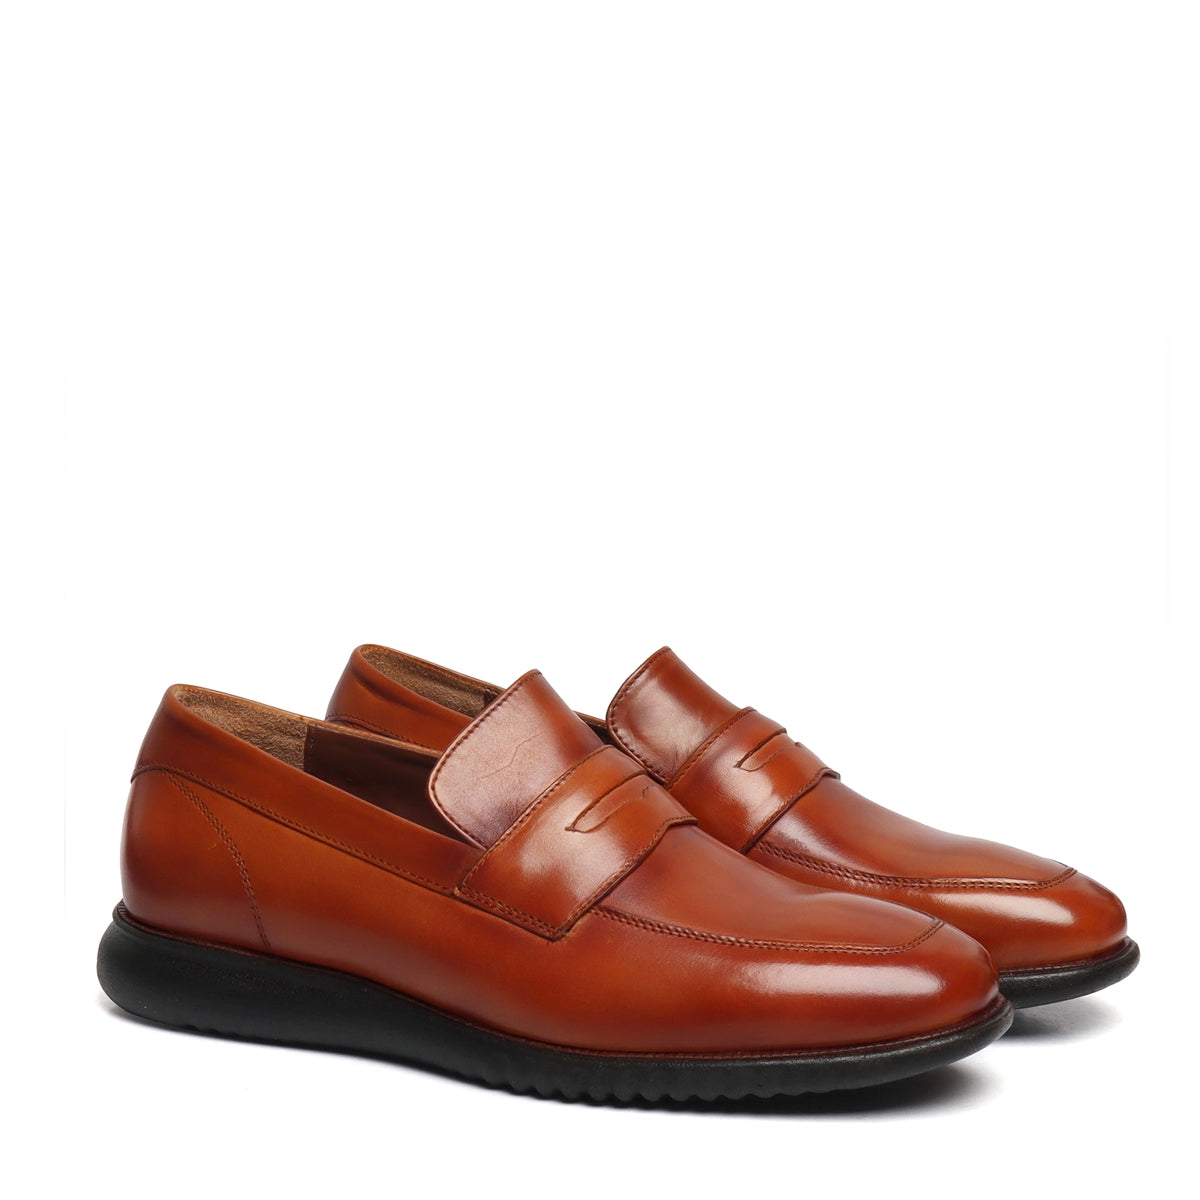 Light Weight Tan Leather Loafers with Black Sole